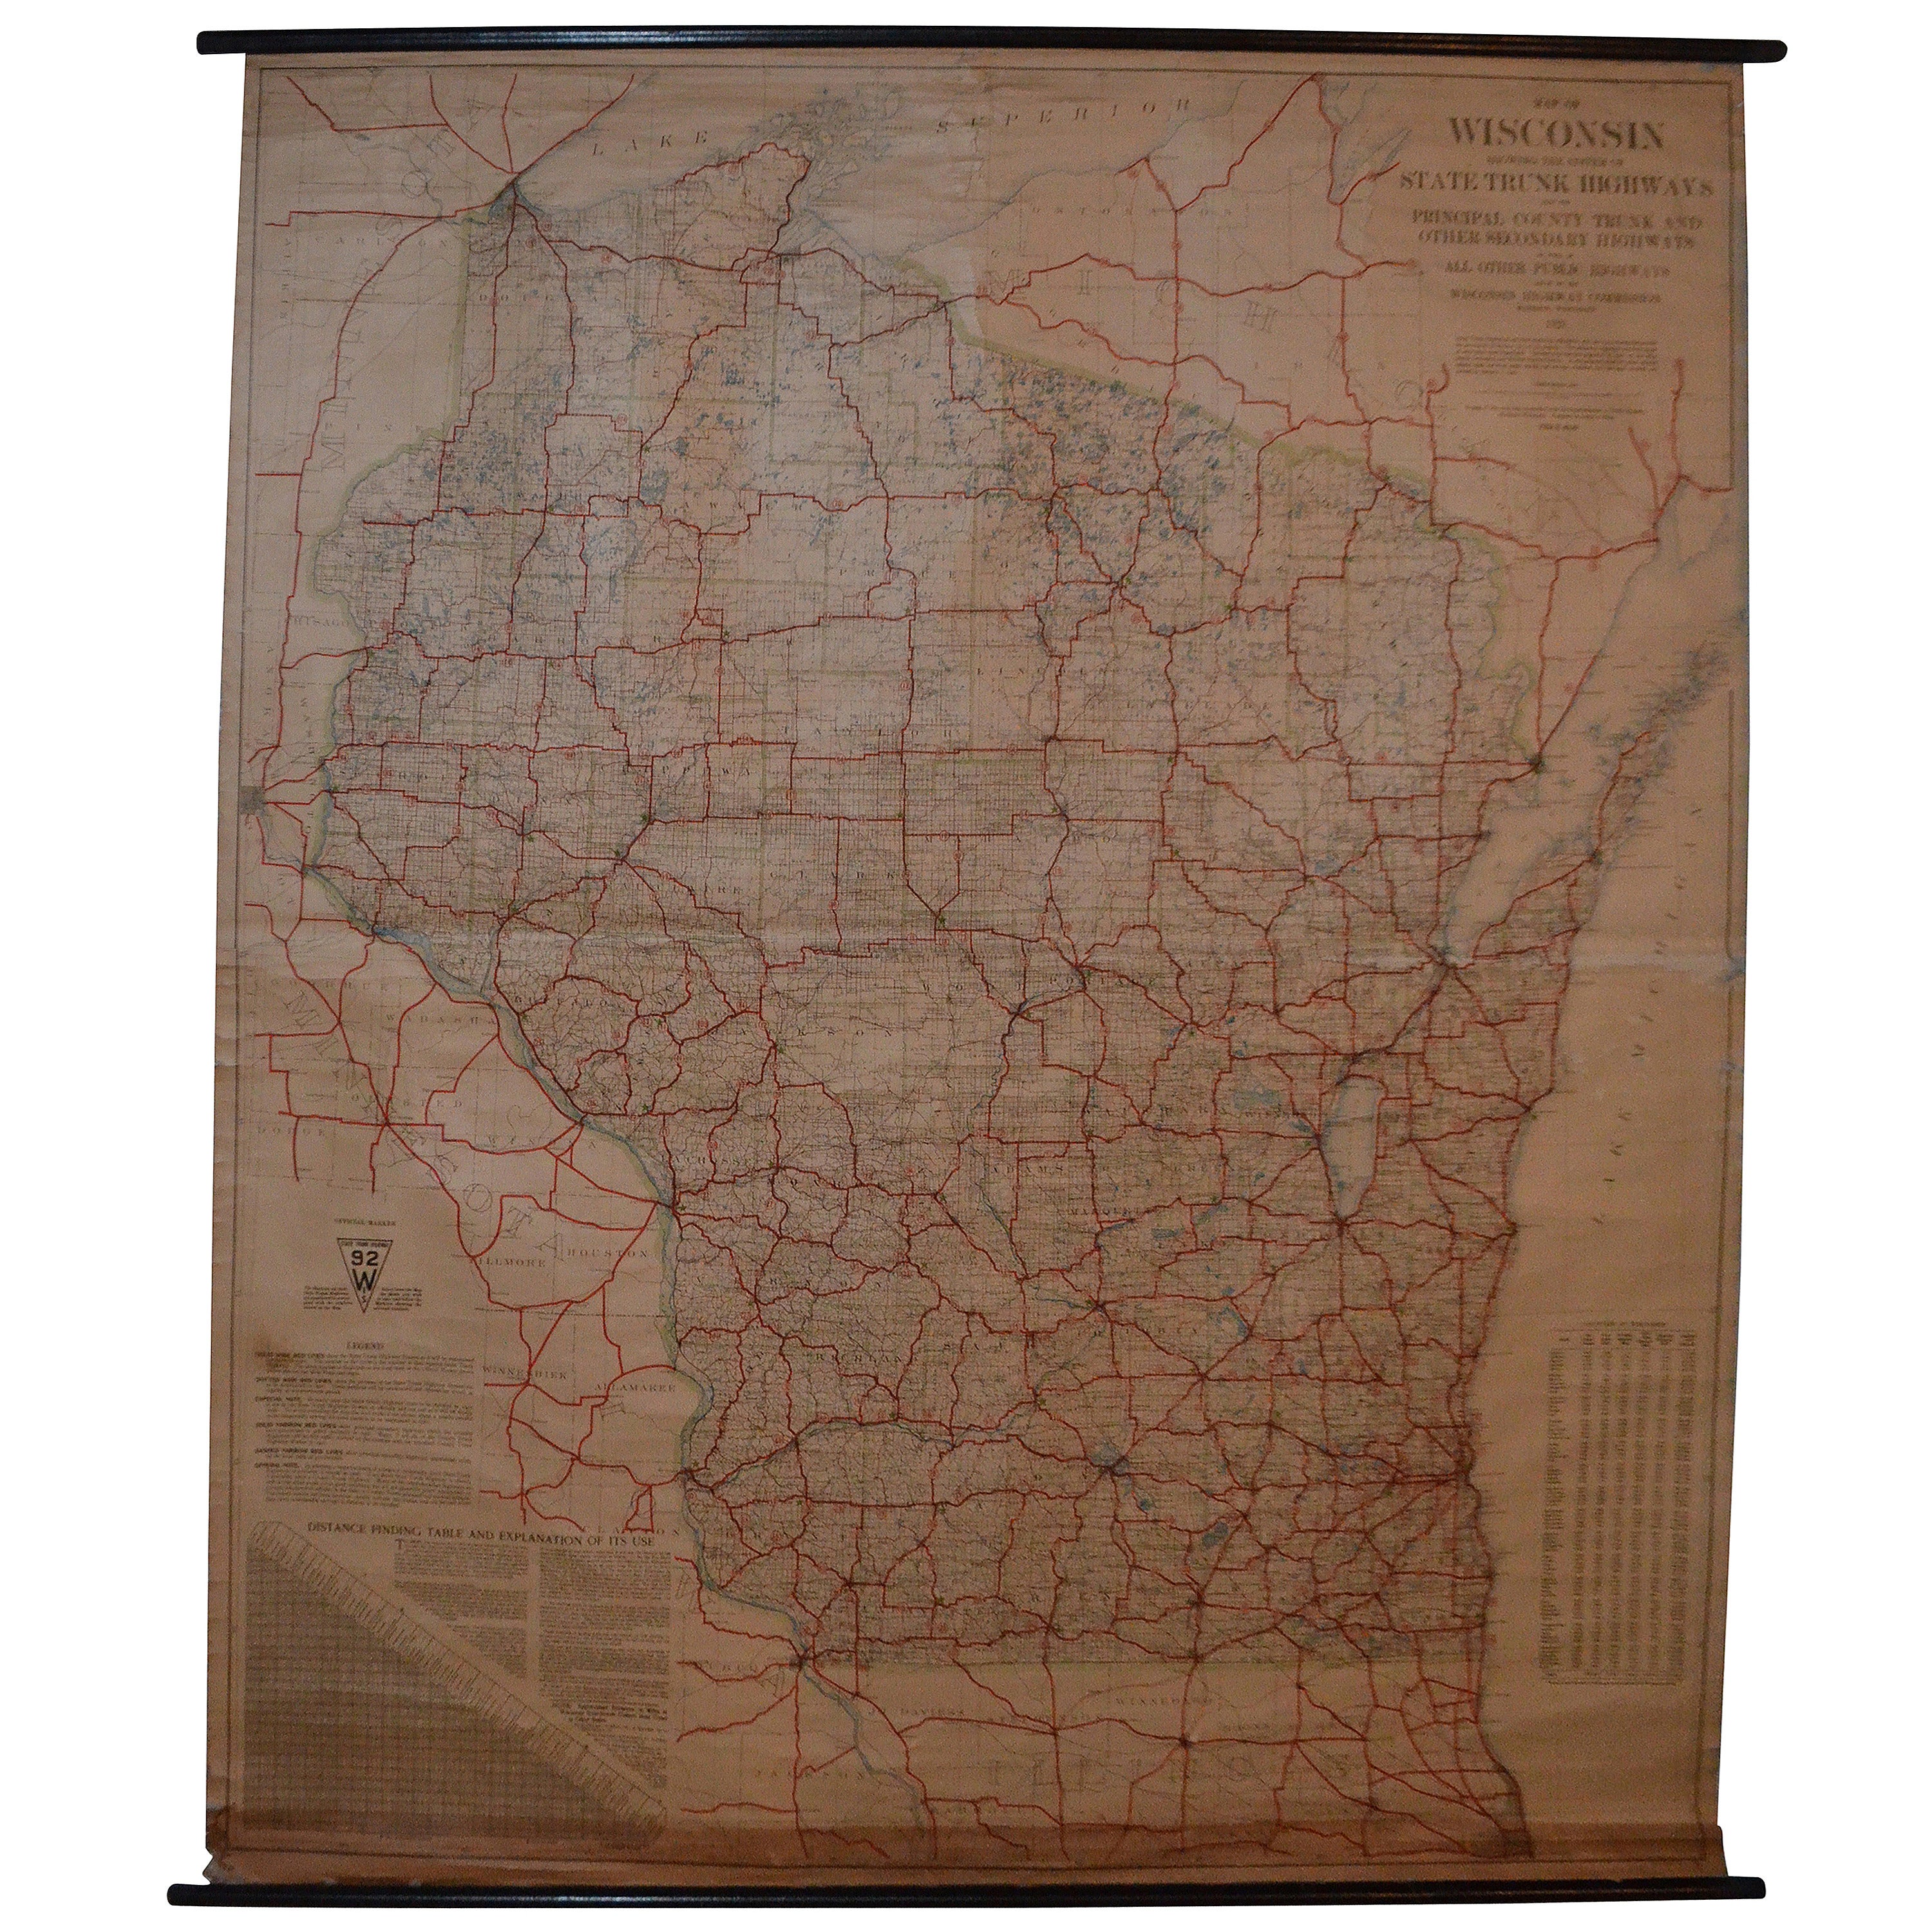 Archival Map of Wisconsin Roads, 1921 Edition